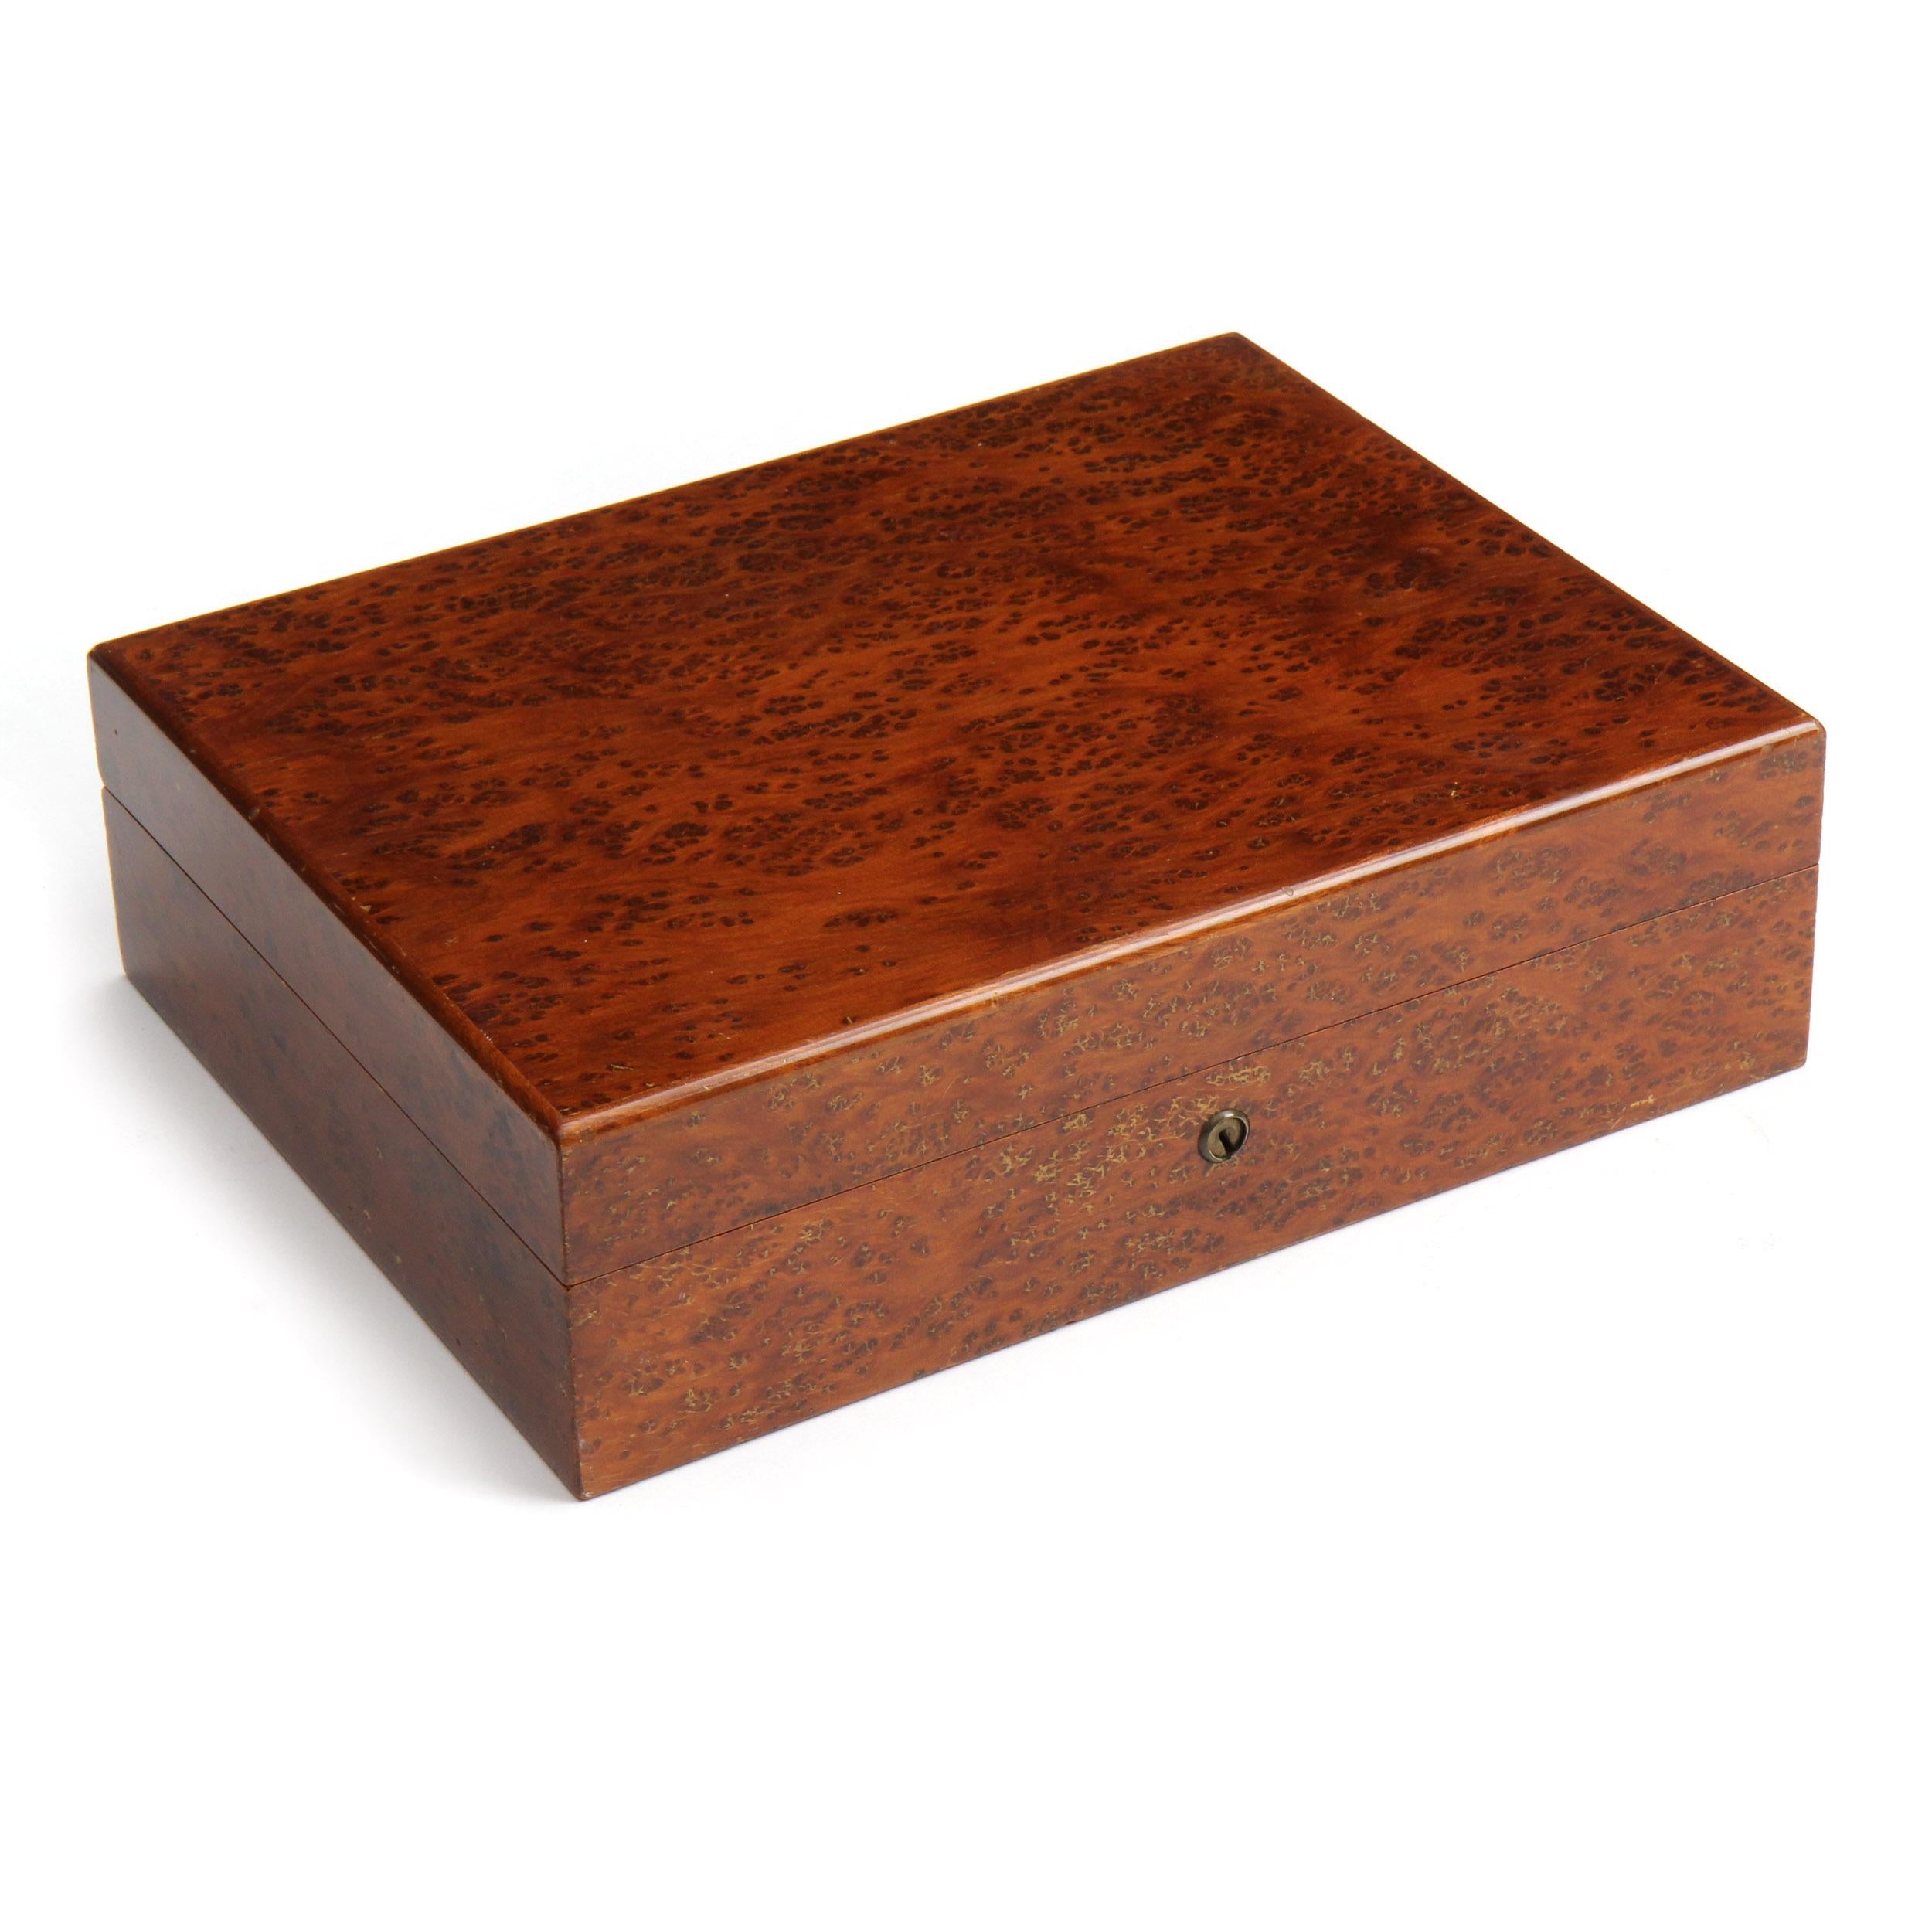 A humidor made of warmly toned burled maple with a cedar and glass interior.